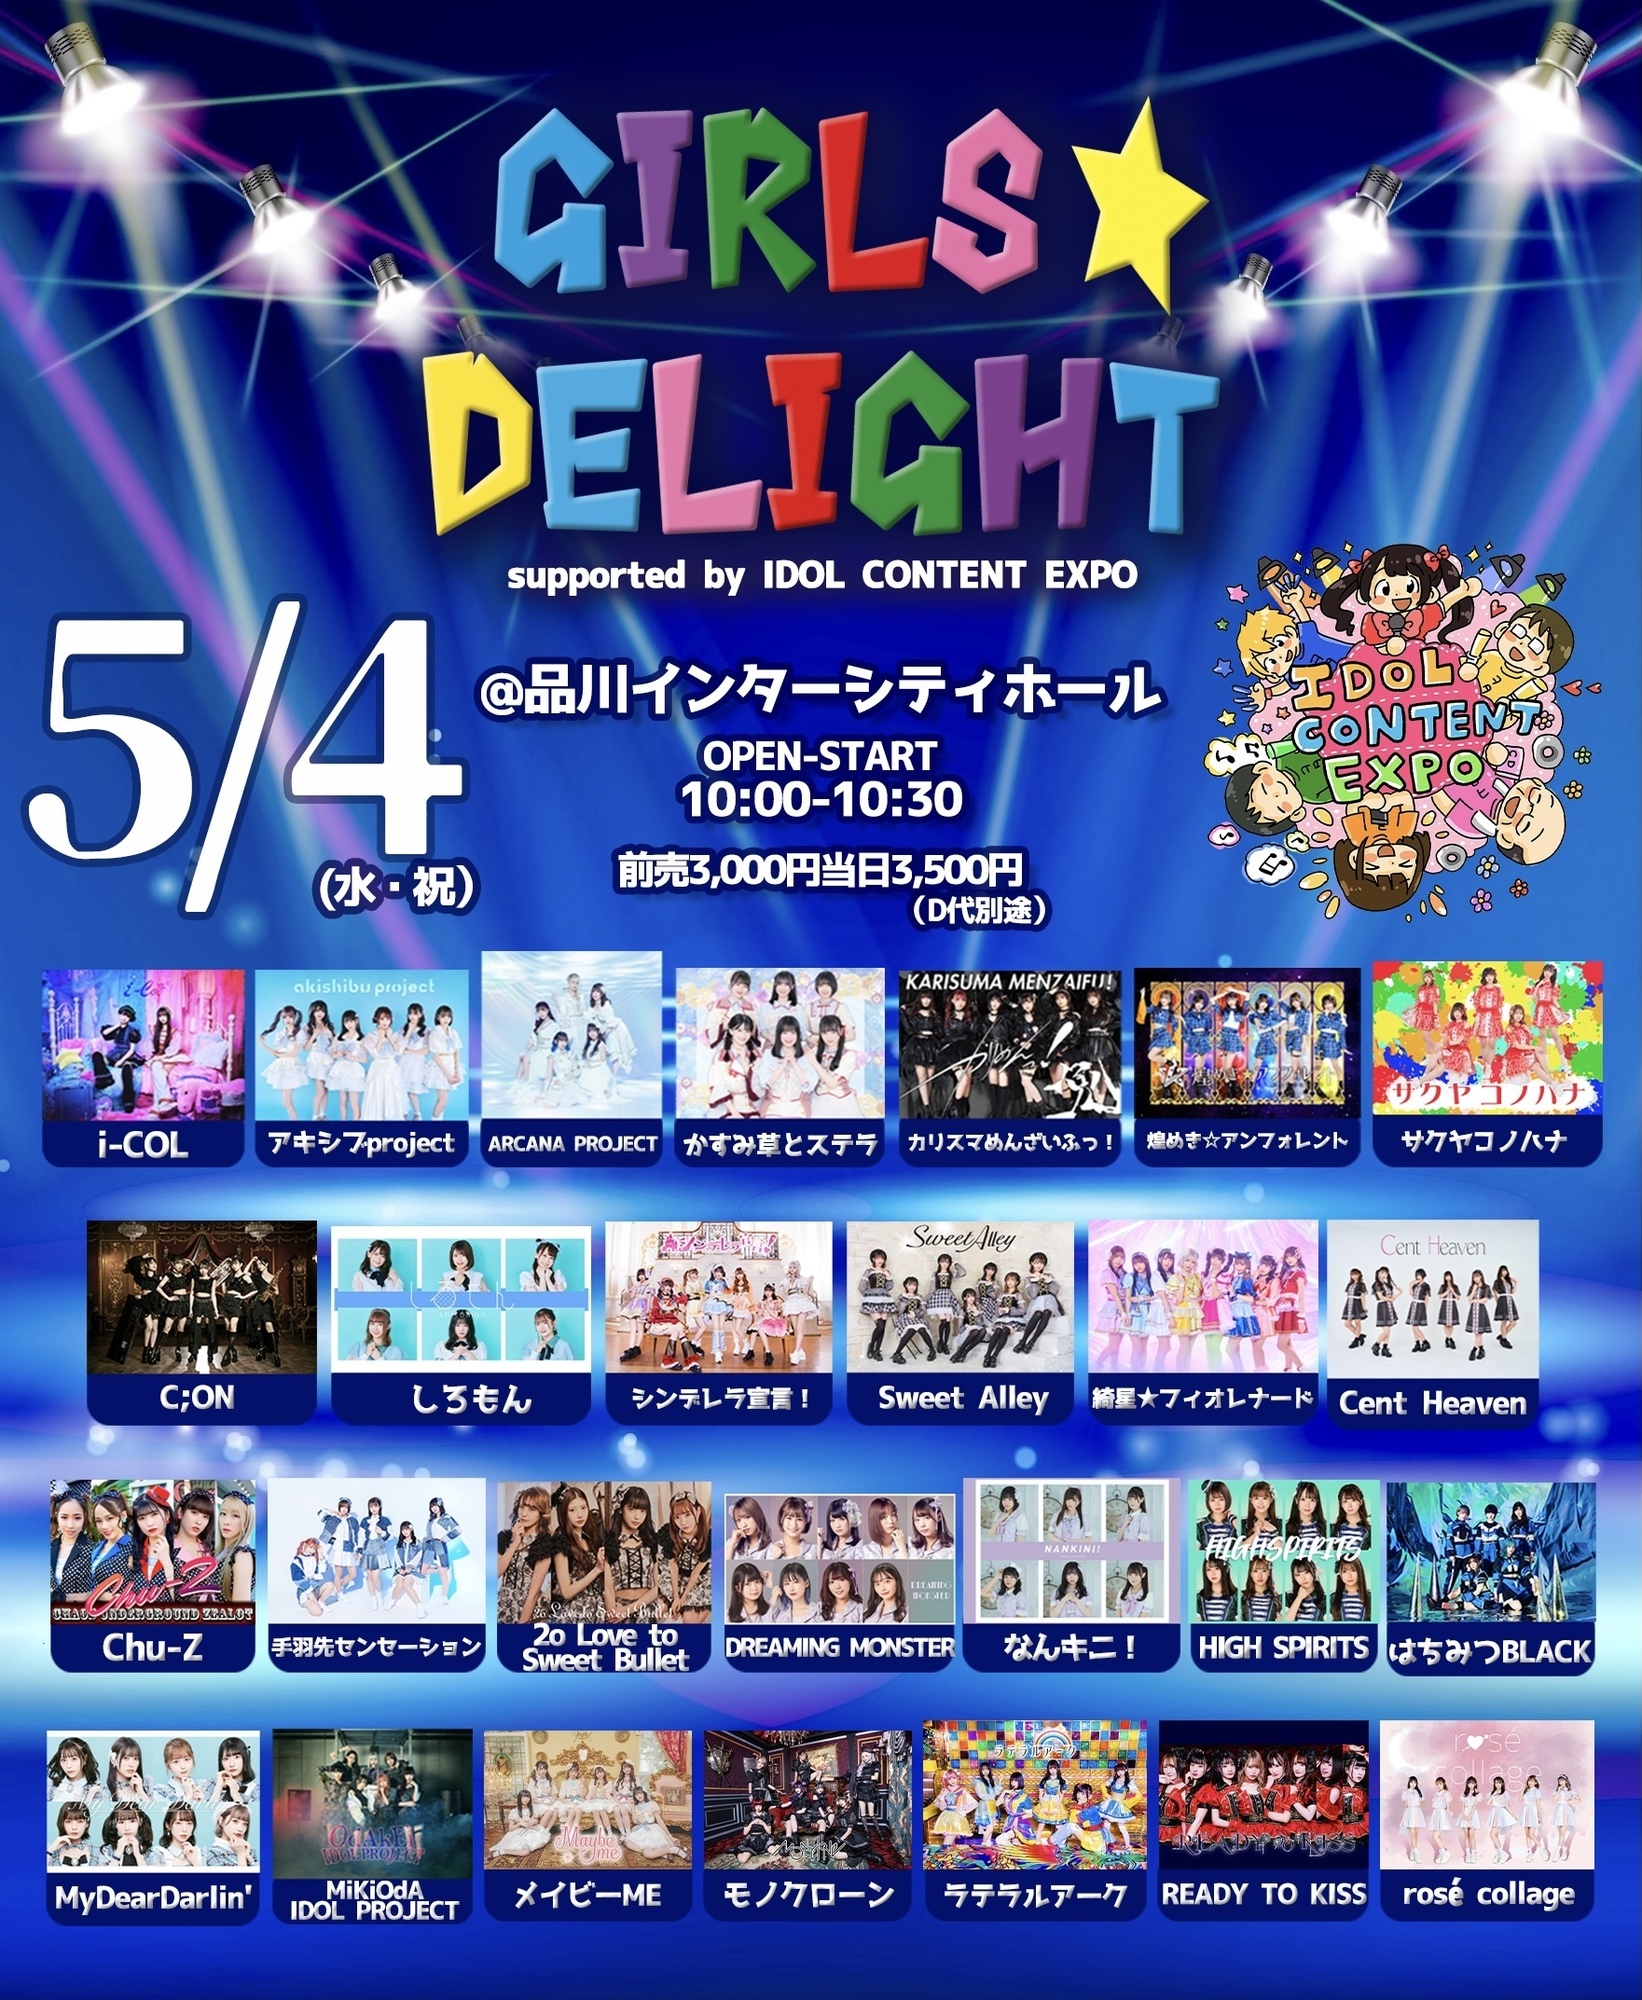 LIVE】5/4(水)『GIRLS☆DELIGHT supported by IDOL CONTENT EXPO』に 